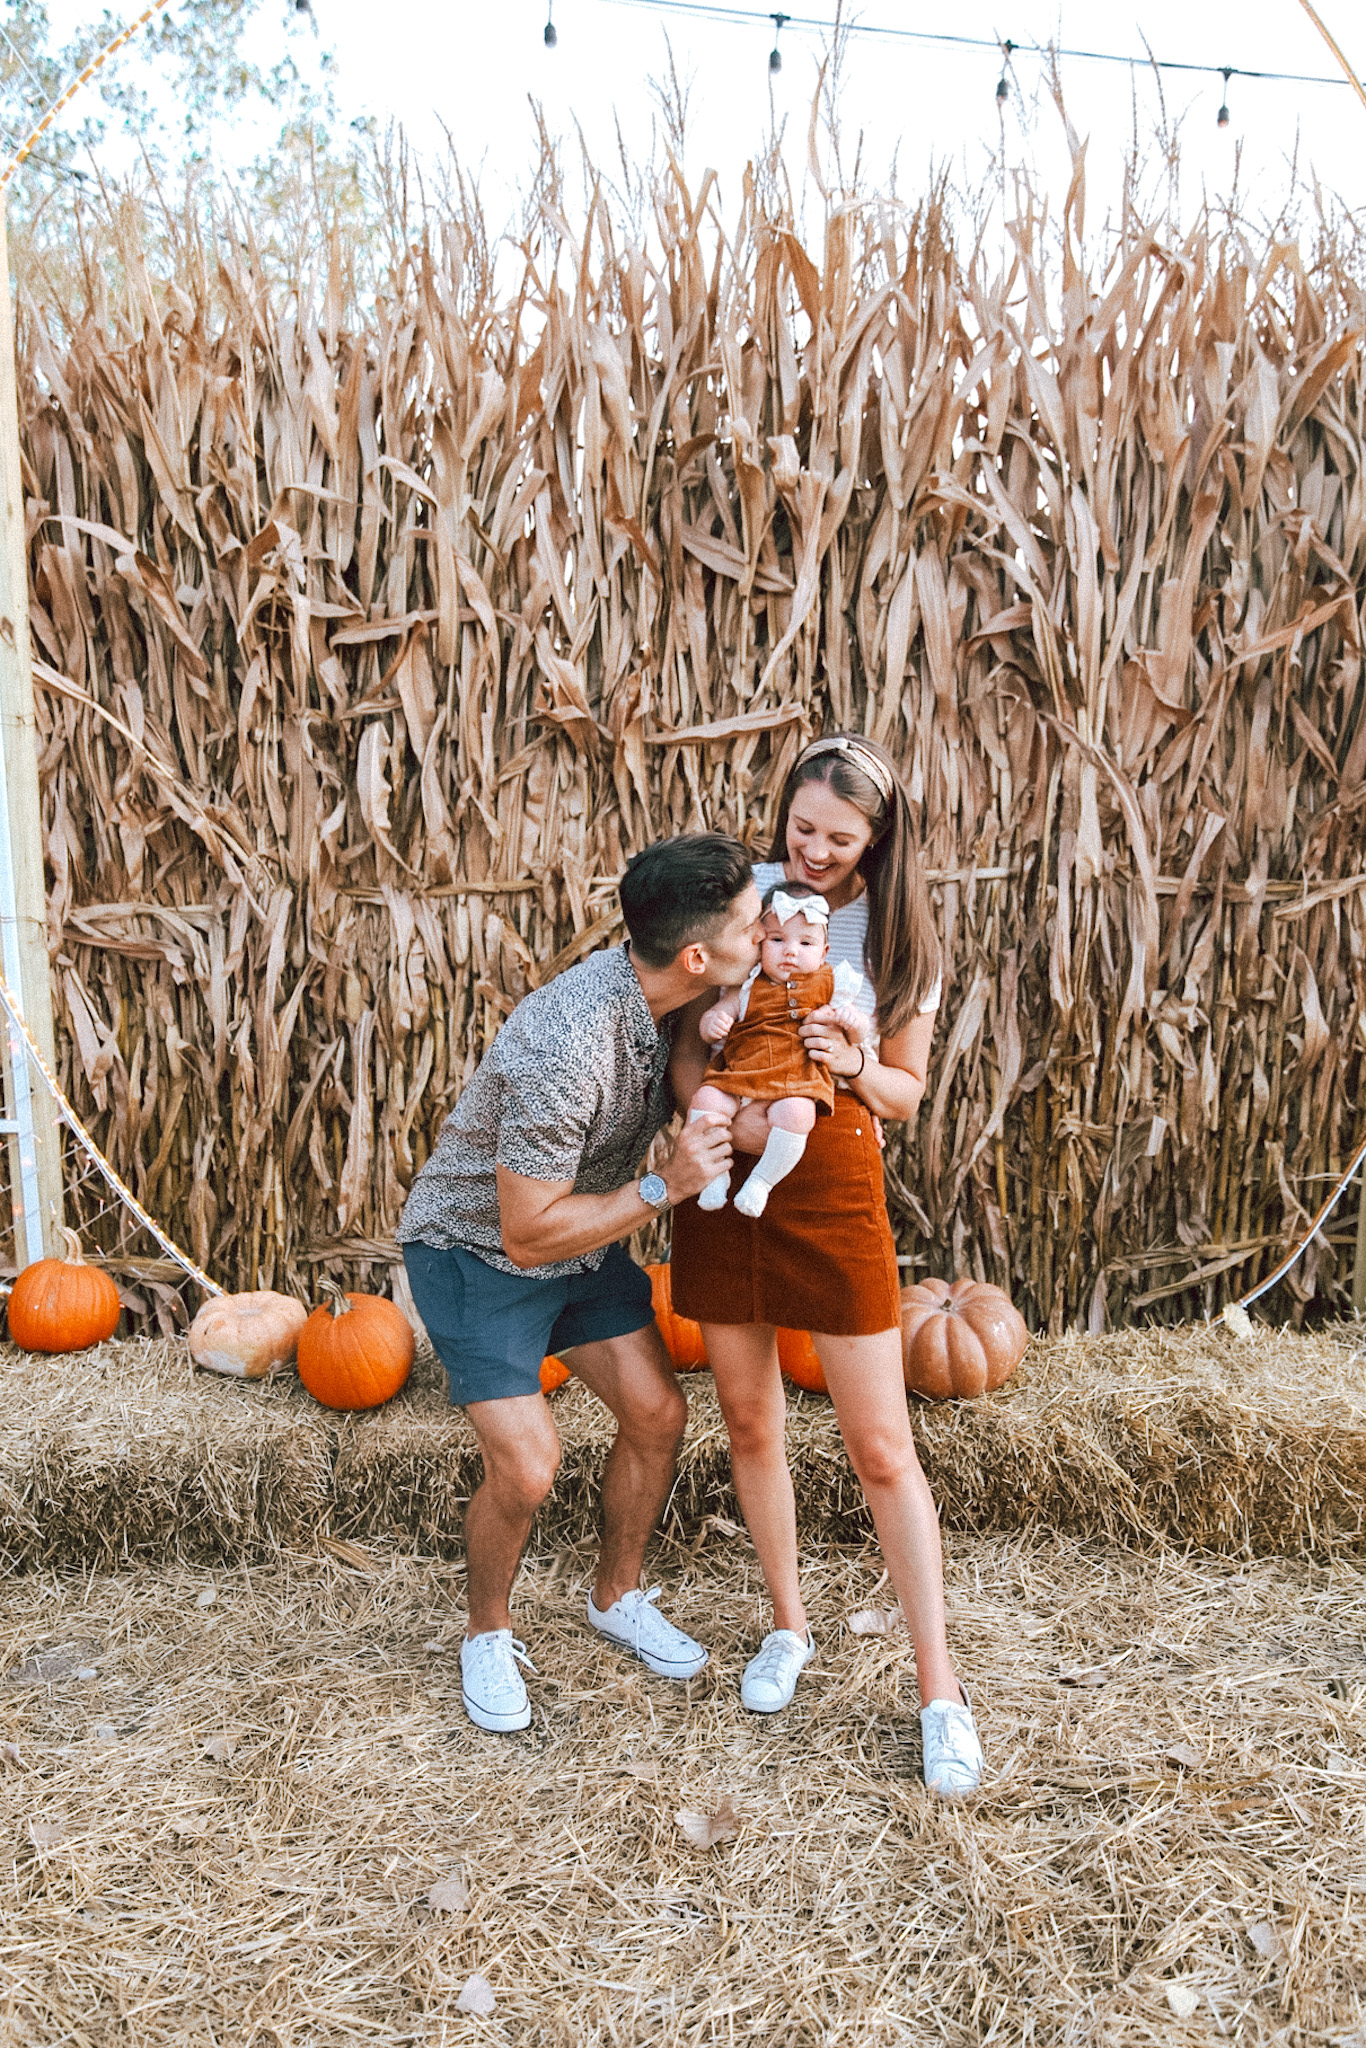 What to wear to pumpkin patch